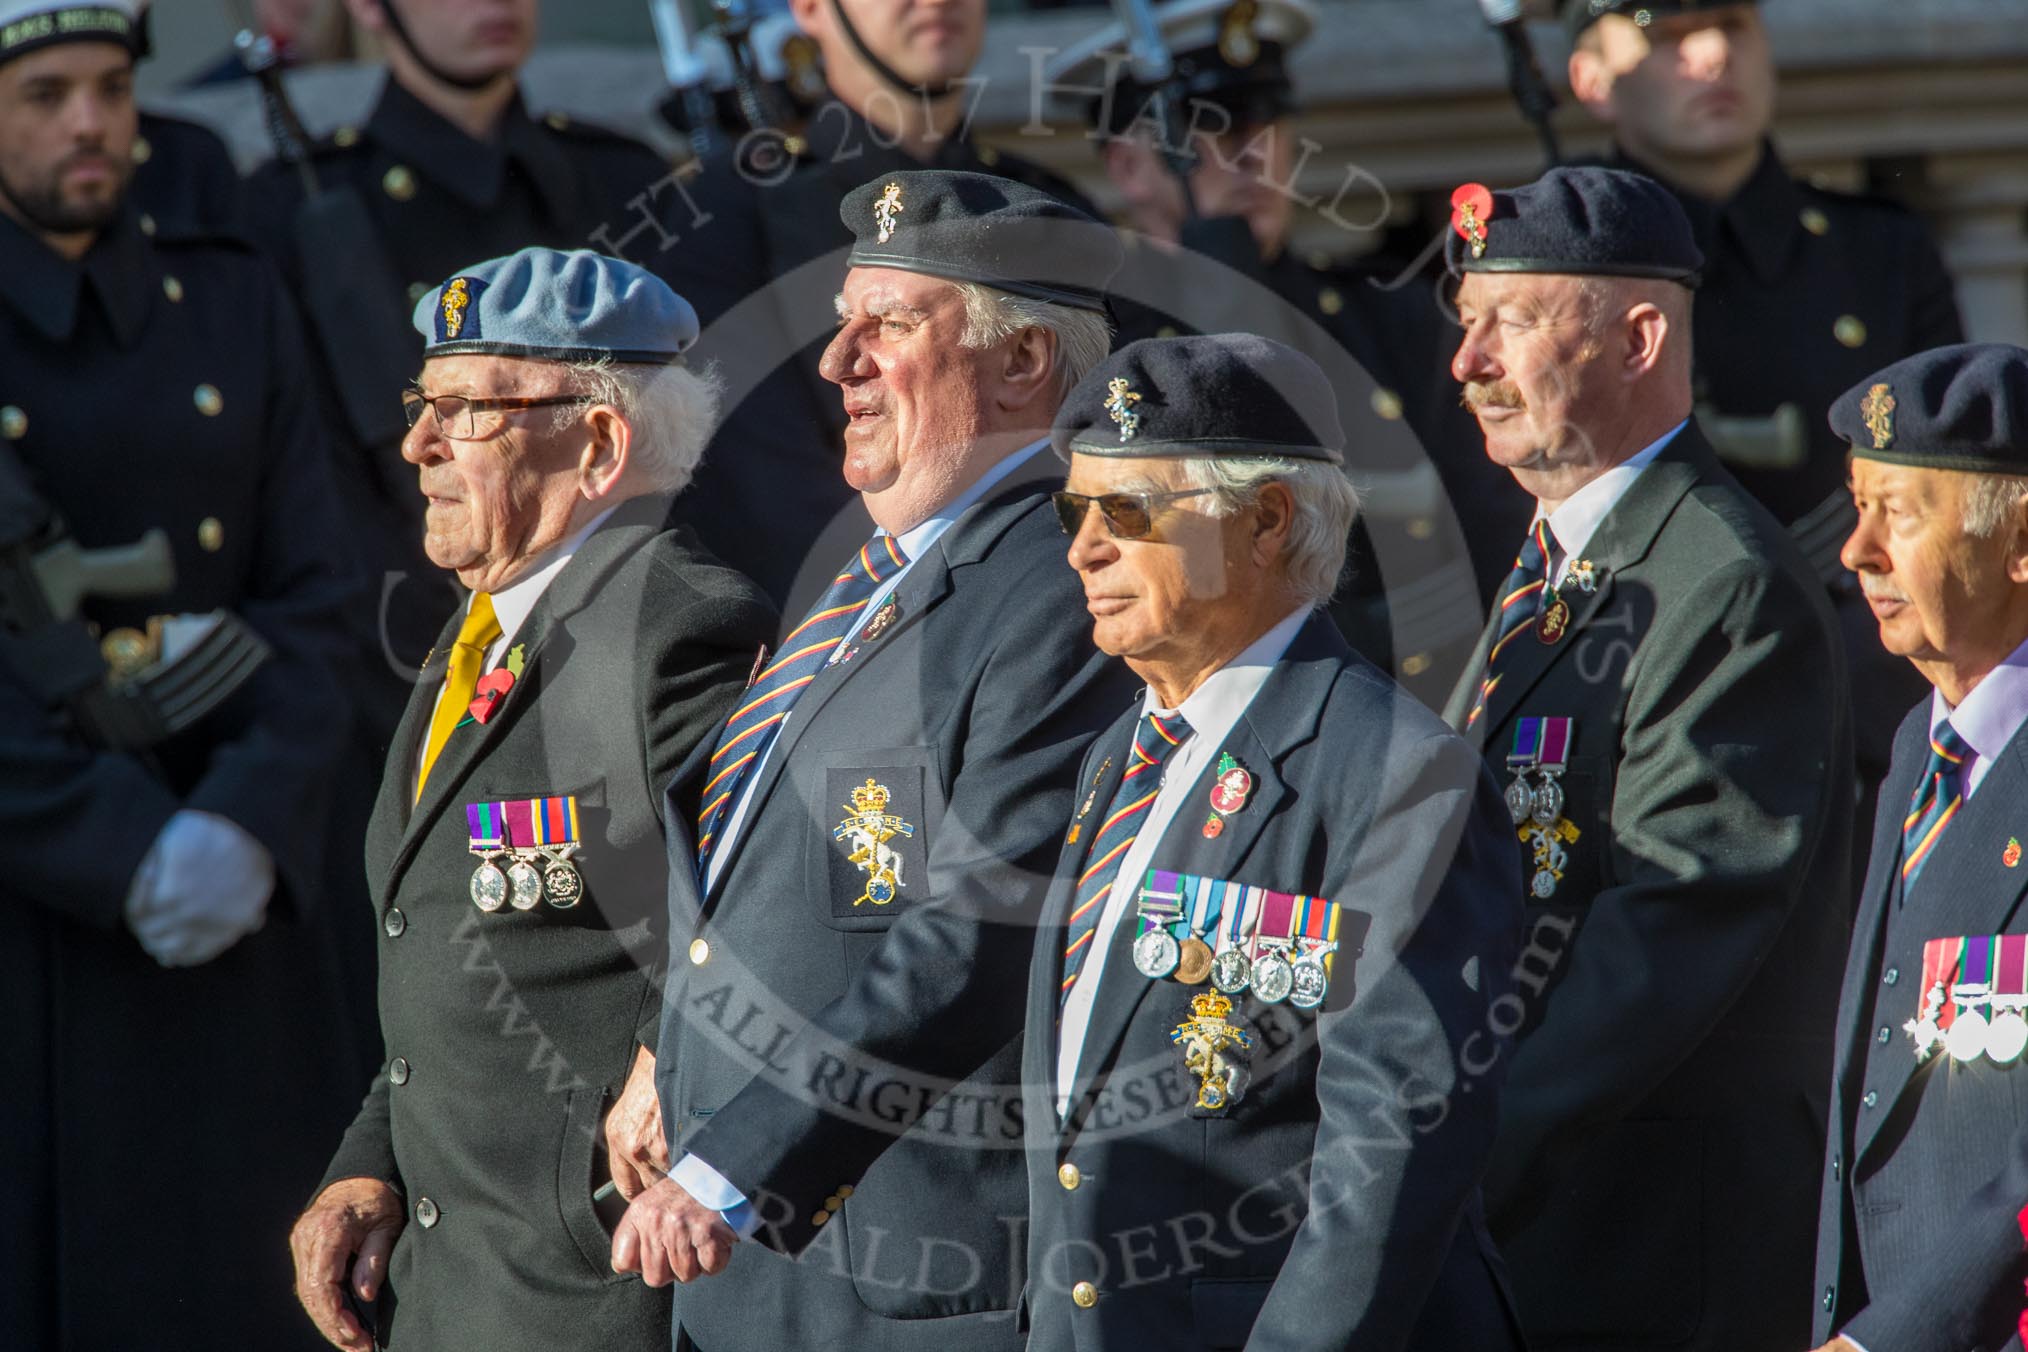 Arborfield Old Boys Association (Group B26, 29 members) during the Royal British Legion March Past on Remembrance Sunday at the Cenotaph, Whitehall, Westminster, London, 11 November 2018, 12:11.